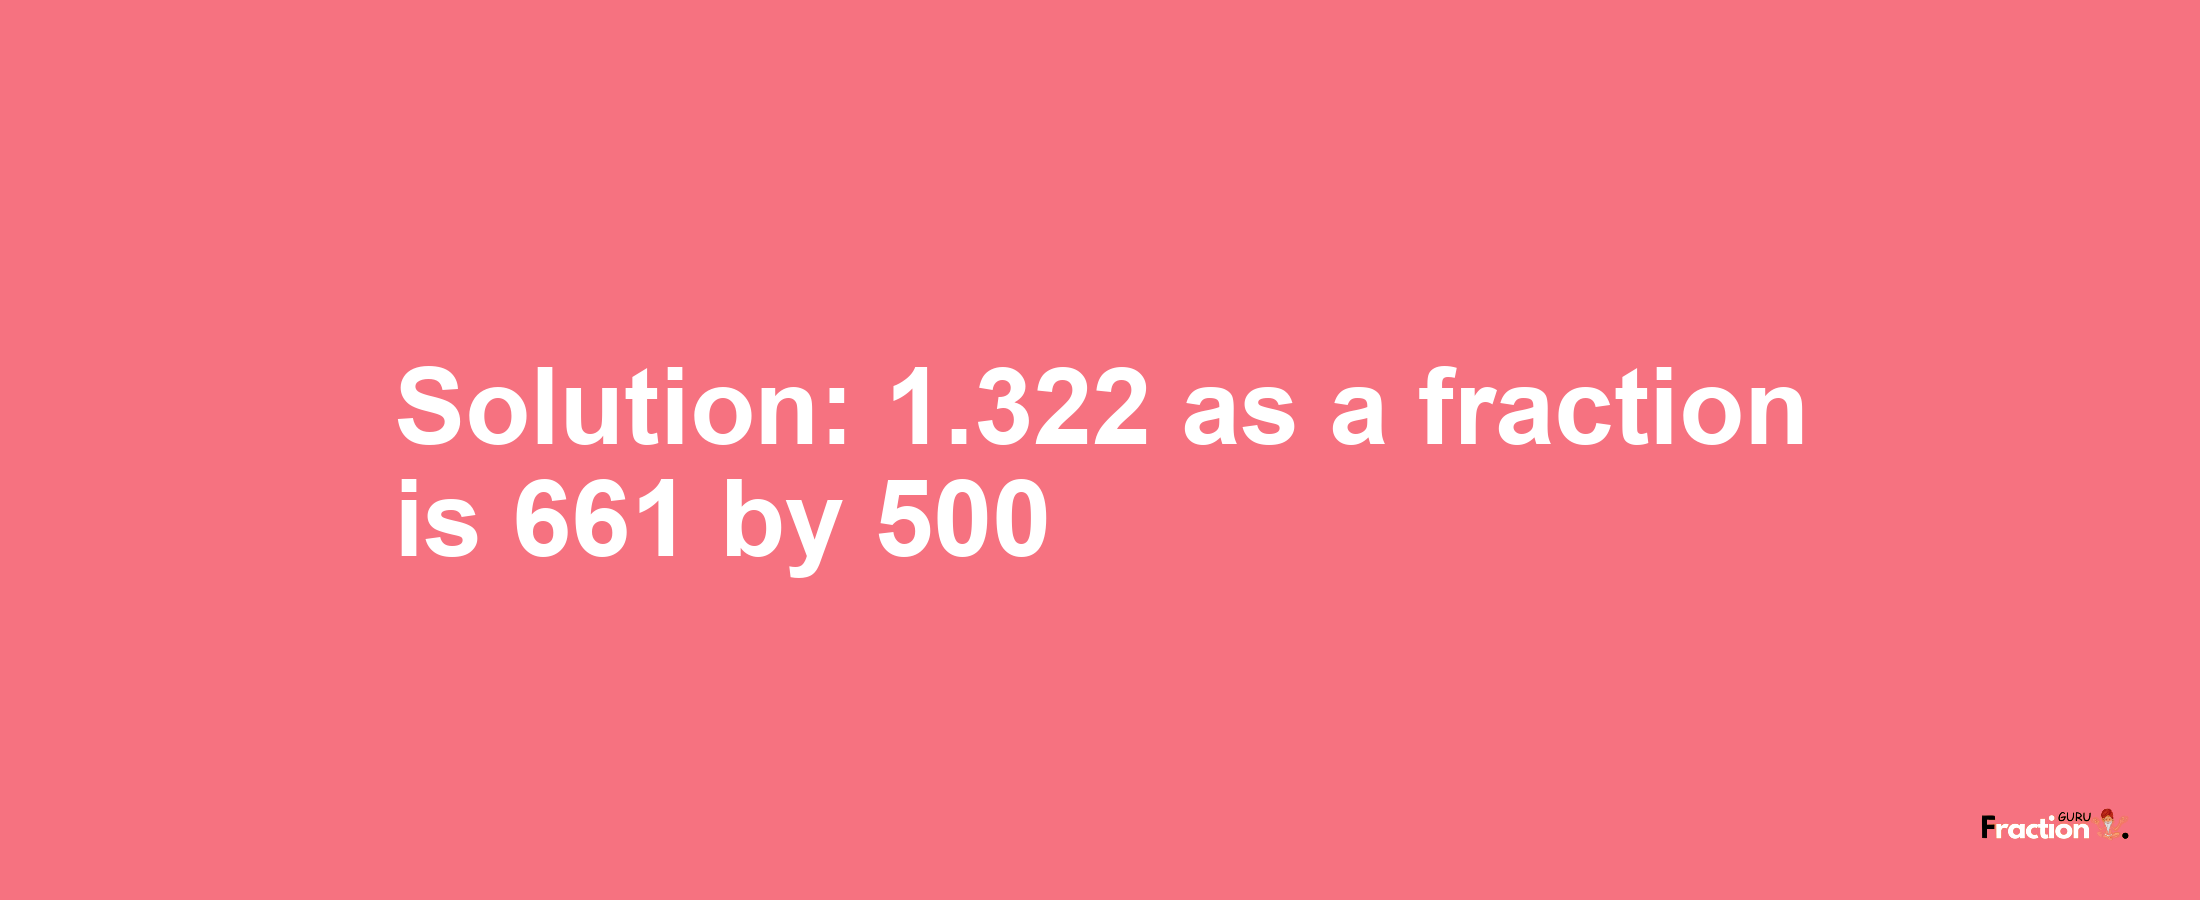 Solution:1.322 as a fraction is 661/500